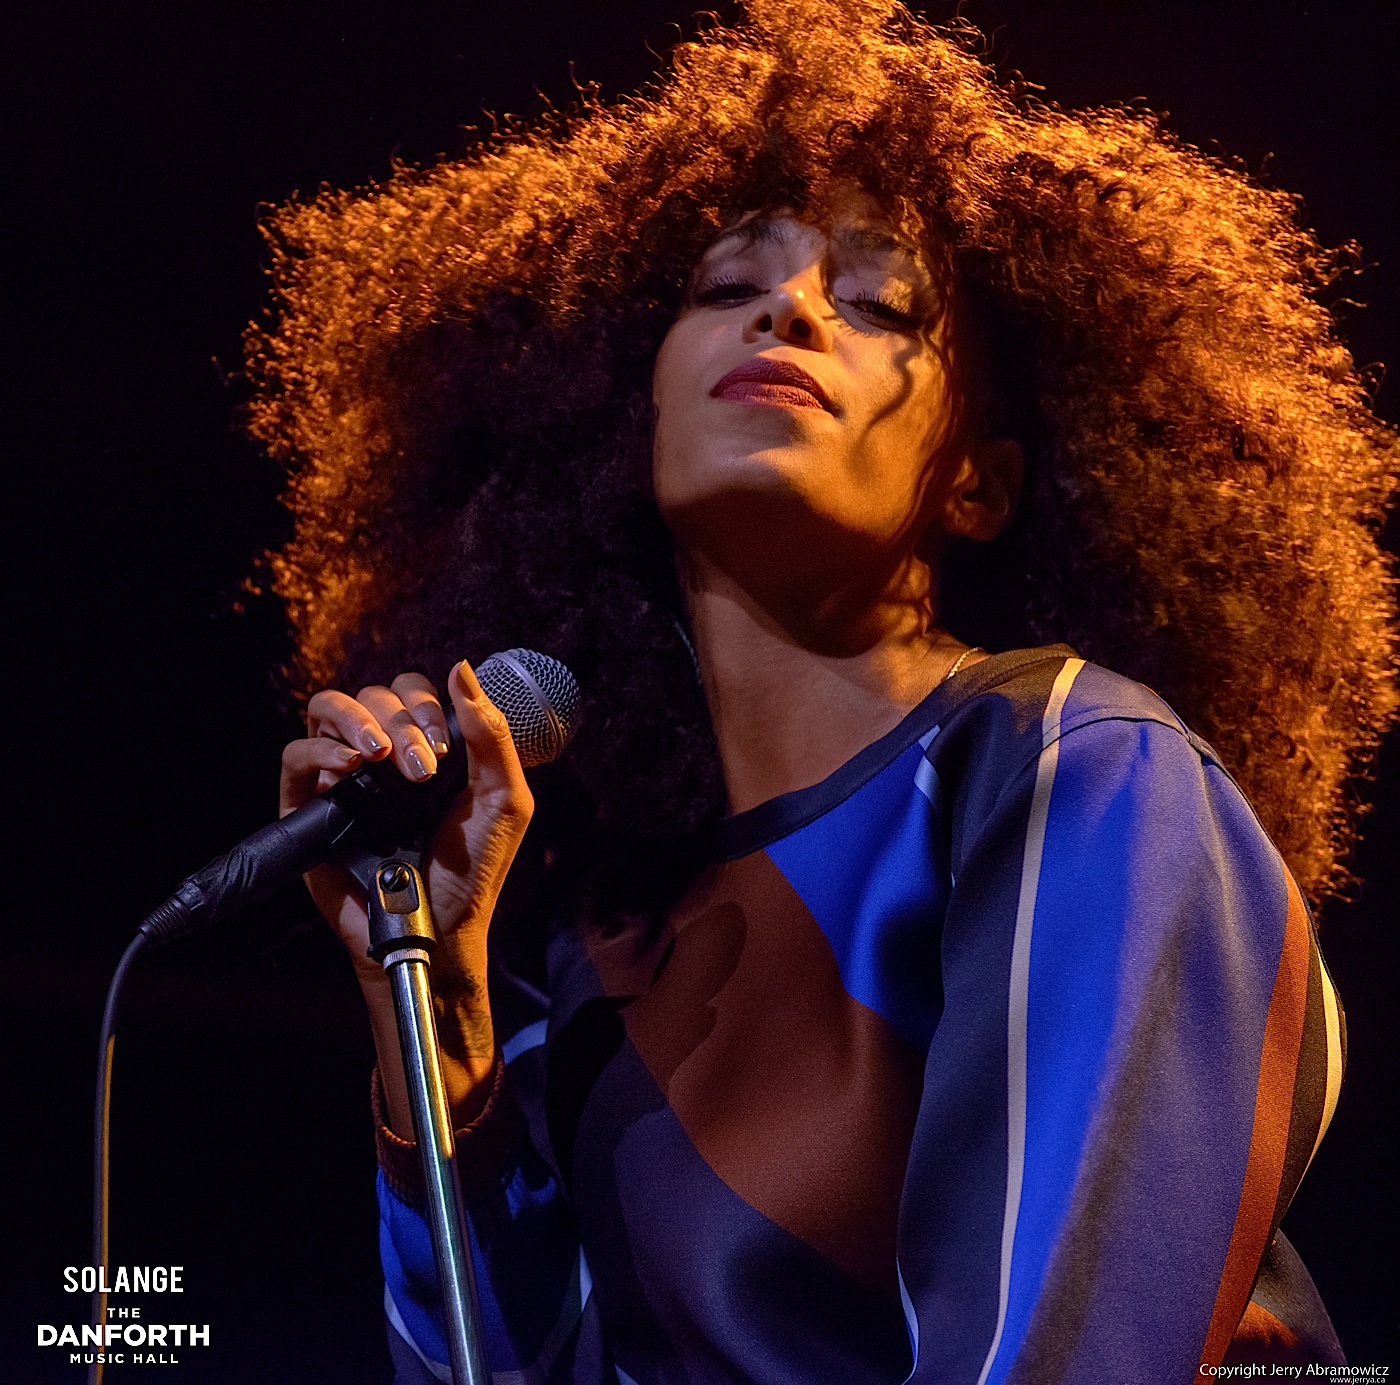 Solange plays to a packed house at The Danforth Music Hall